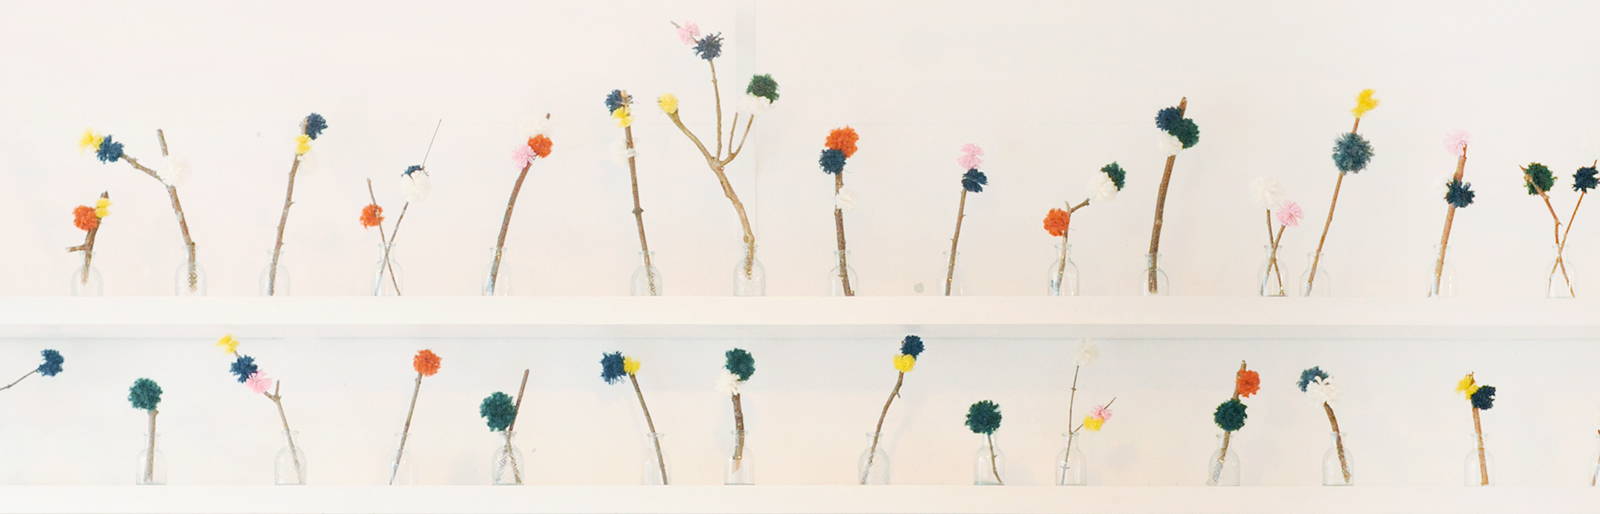 A display of home made pom poms styled on twigs in glass jars on the counterback.